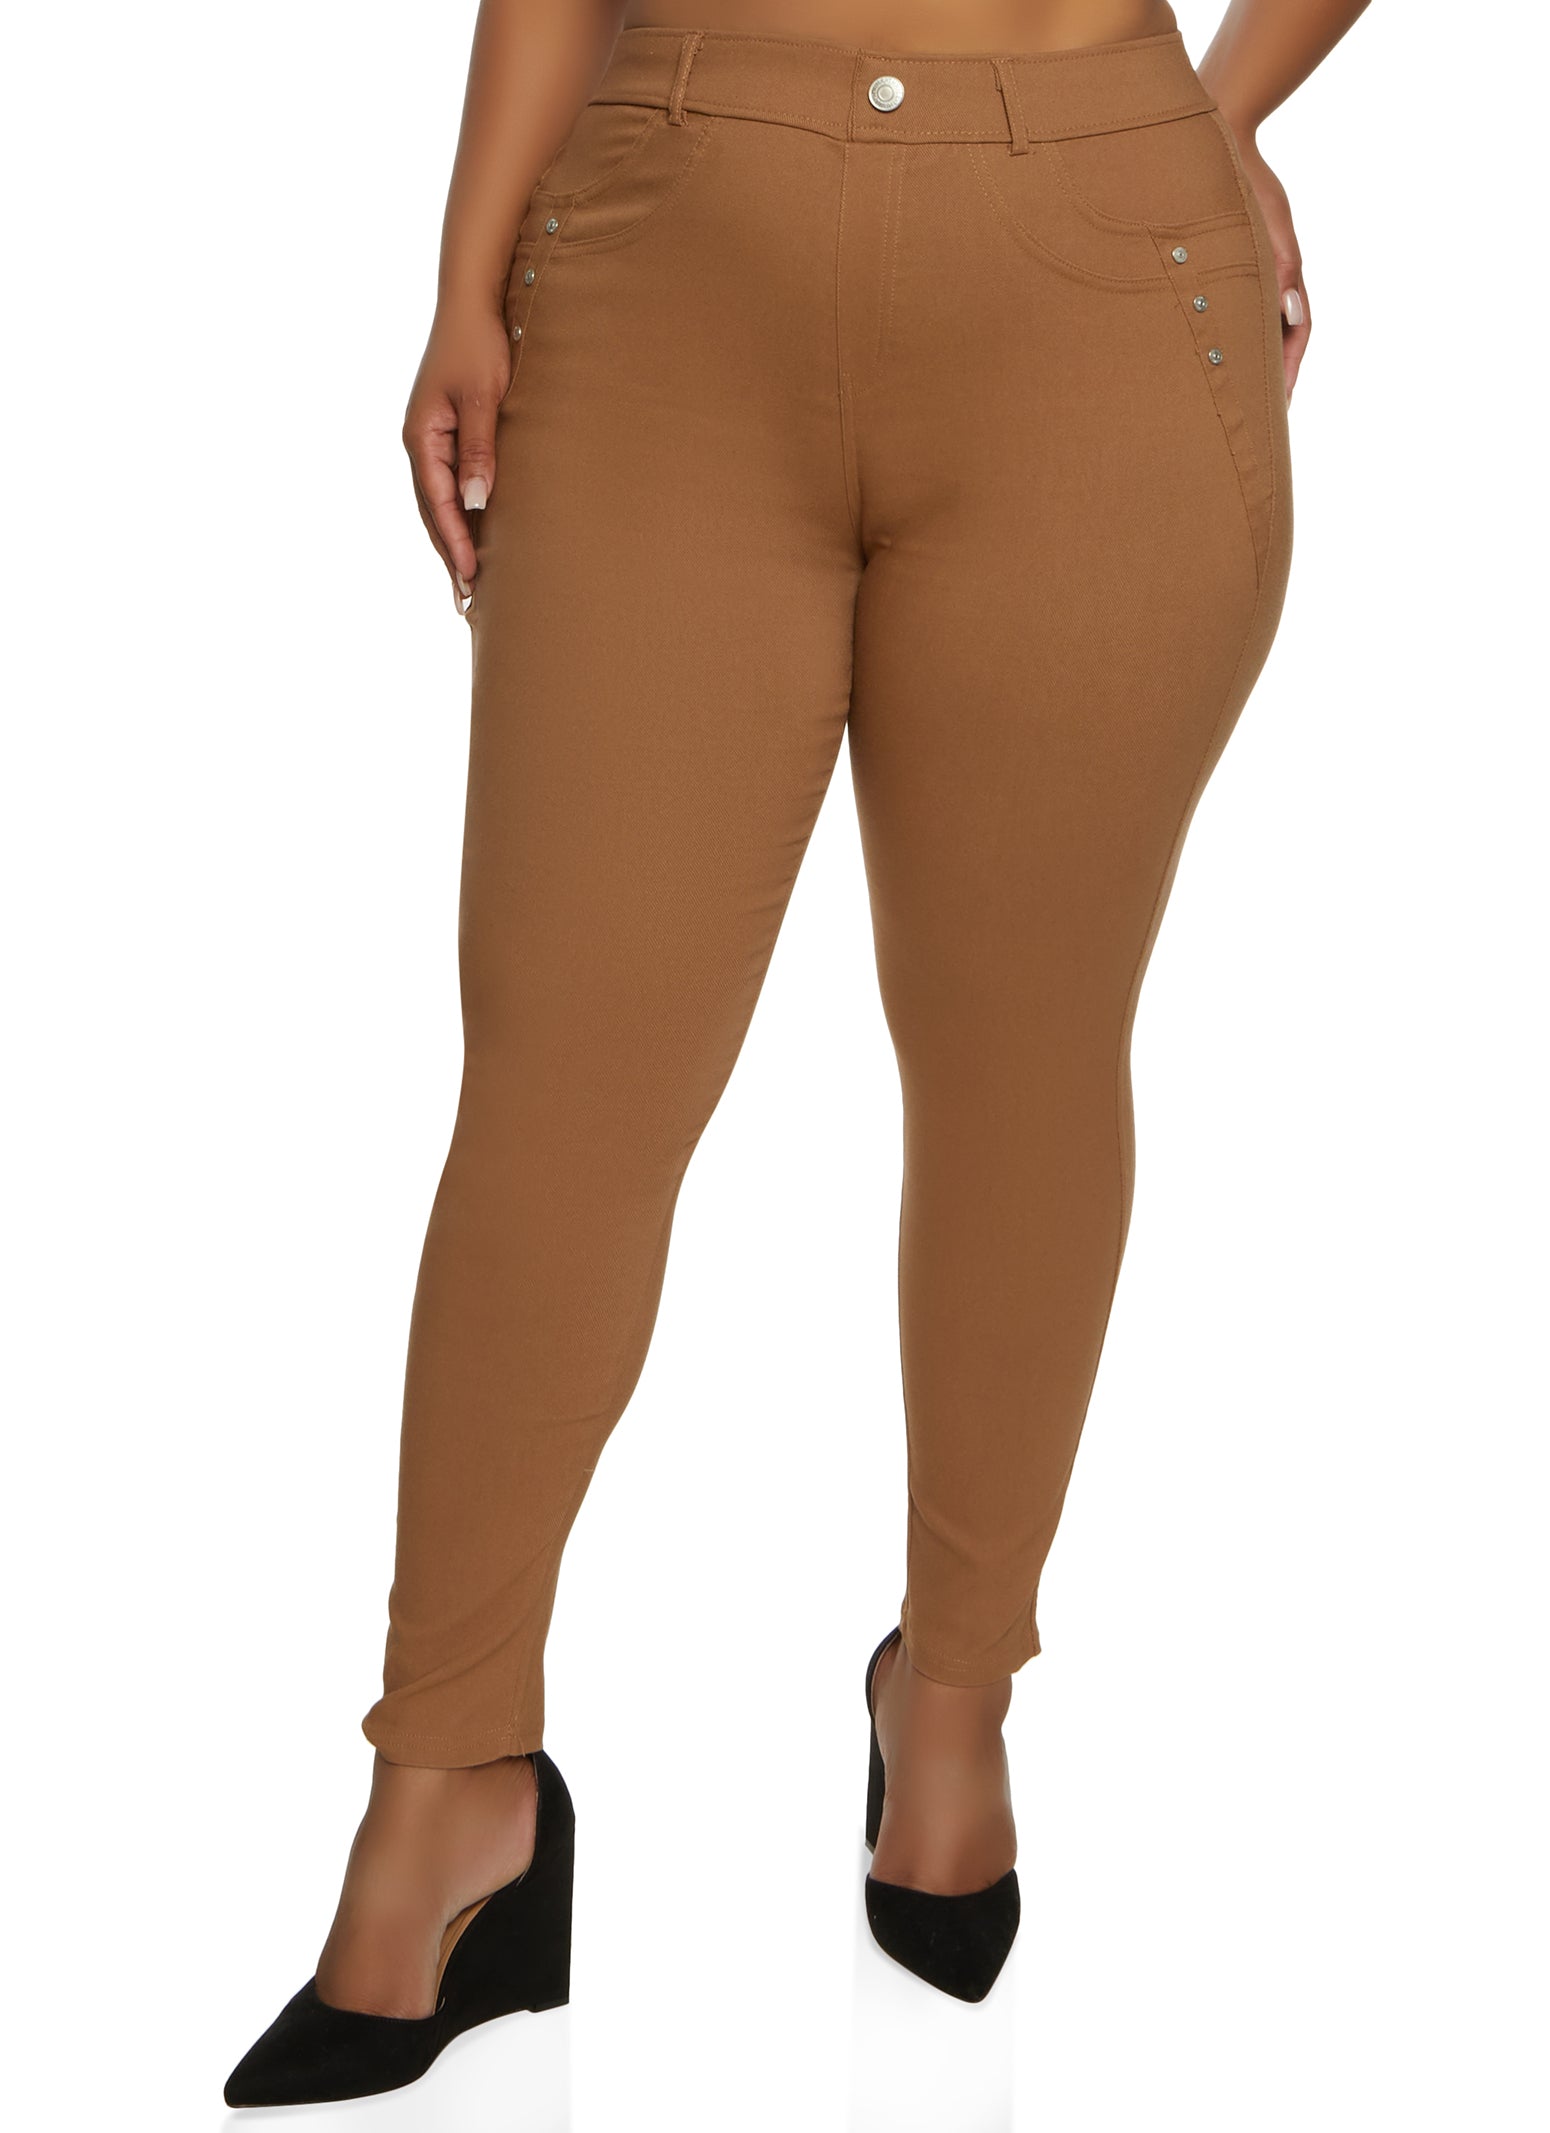 Rainbow Shops Womens Plus Size Hyperstretch Push Up Pants, Brown